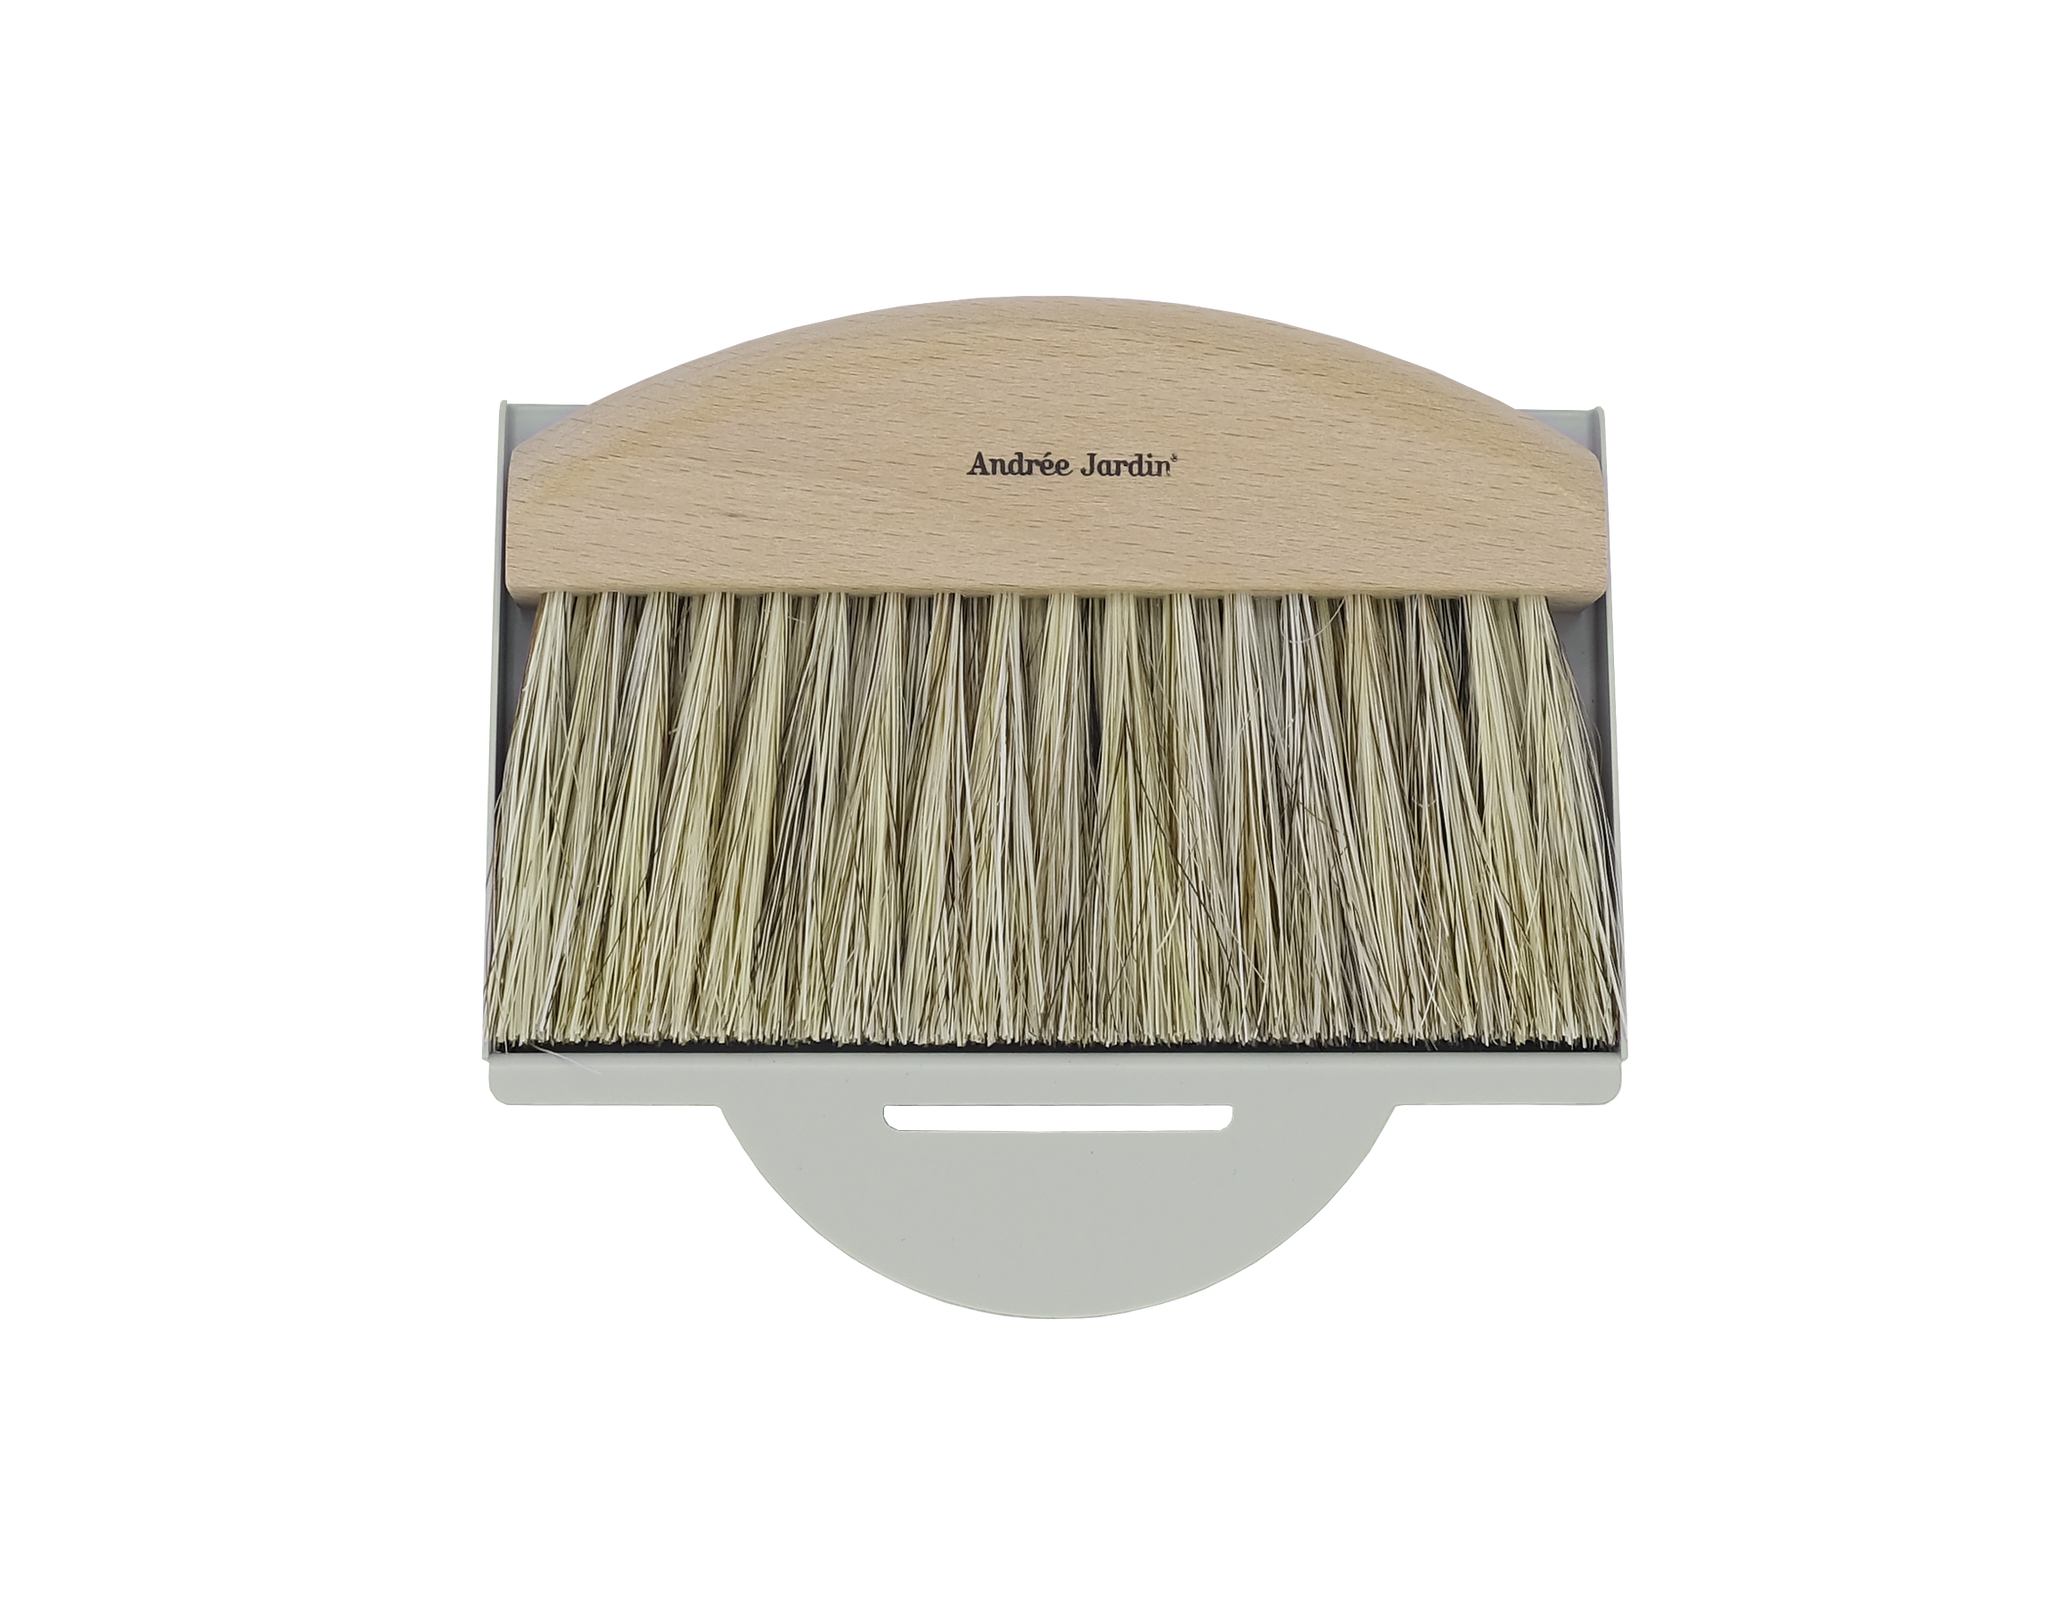 Andrée Jardin Mr. and Mrs. Clynk Natural Table Brush and Grey Dustpan Set